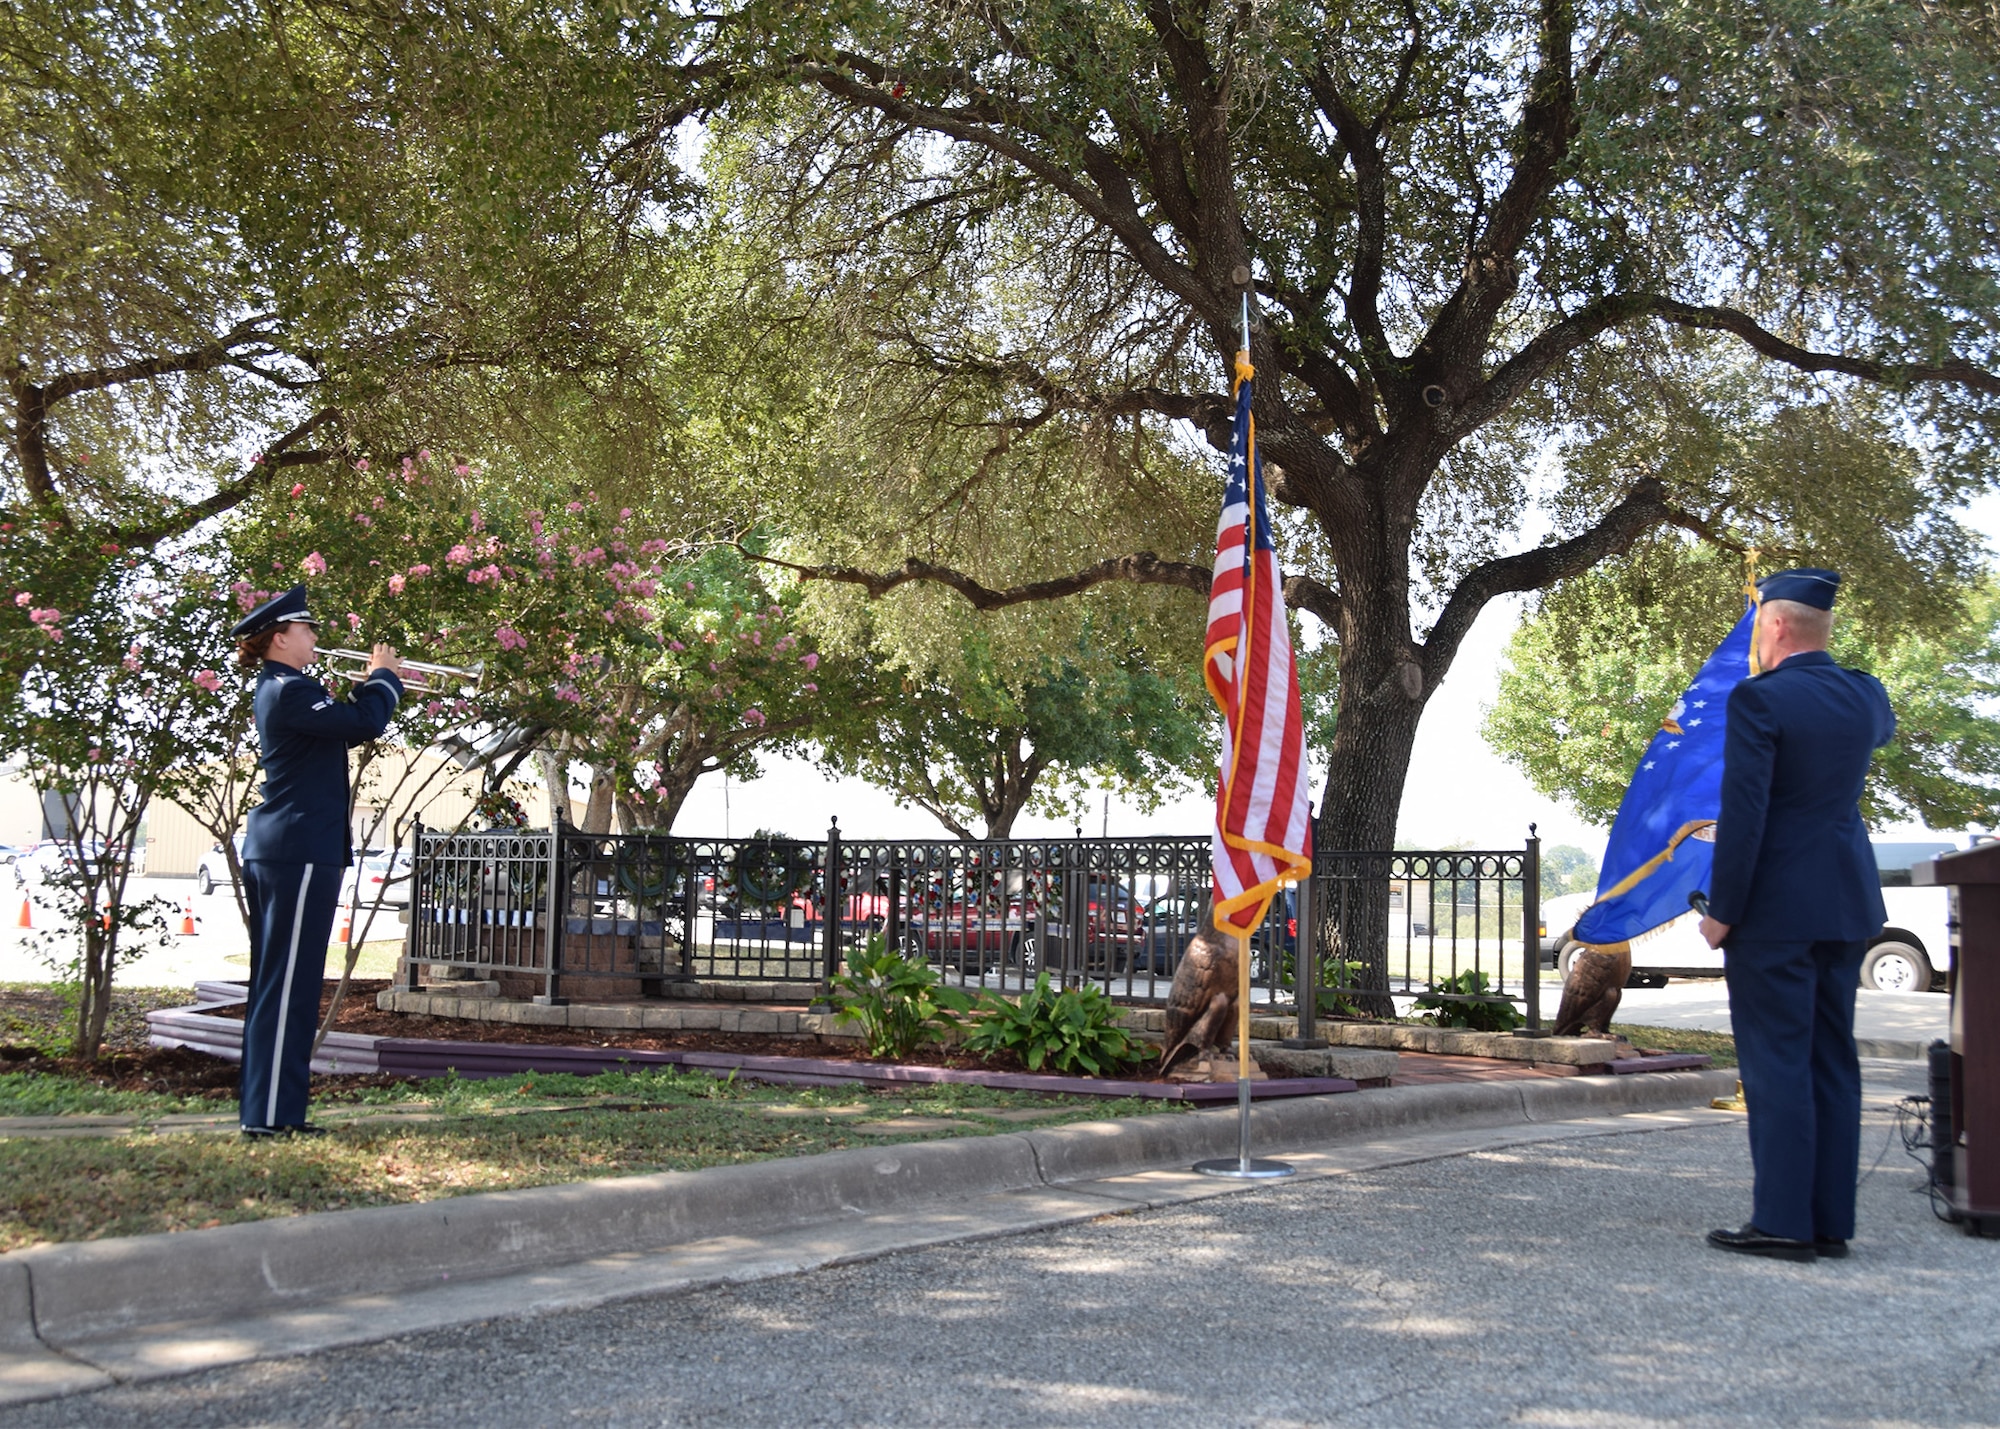 Airman 1st Class Clare W. Hogan, Band of the West, plays Taps at a remembrance and wreath laying ceremony for the fallen Airmen from mission BRAVO-12 Aug. 28, 2020 at Joint Base San Antonio-Lackland, Texas.